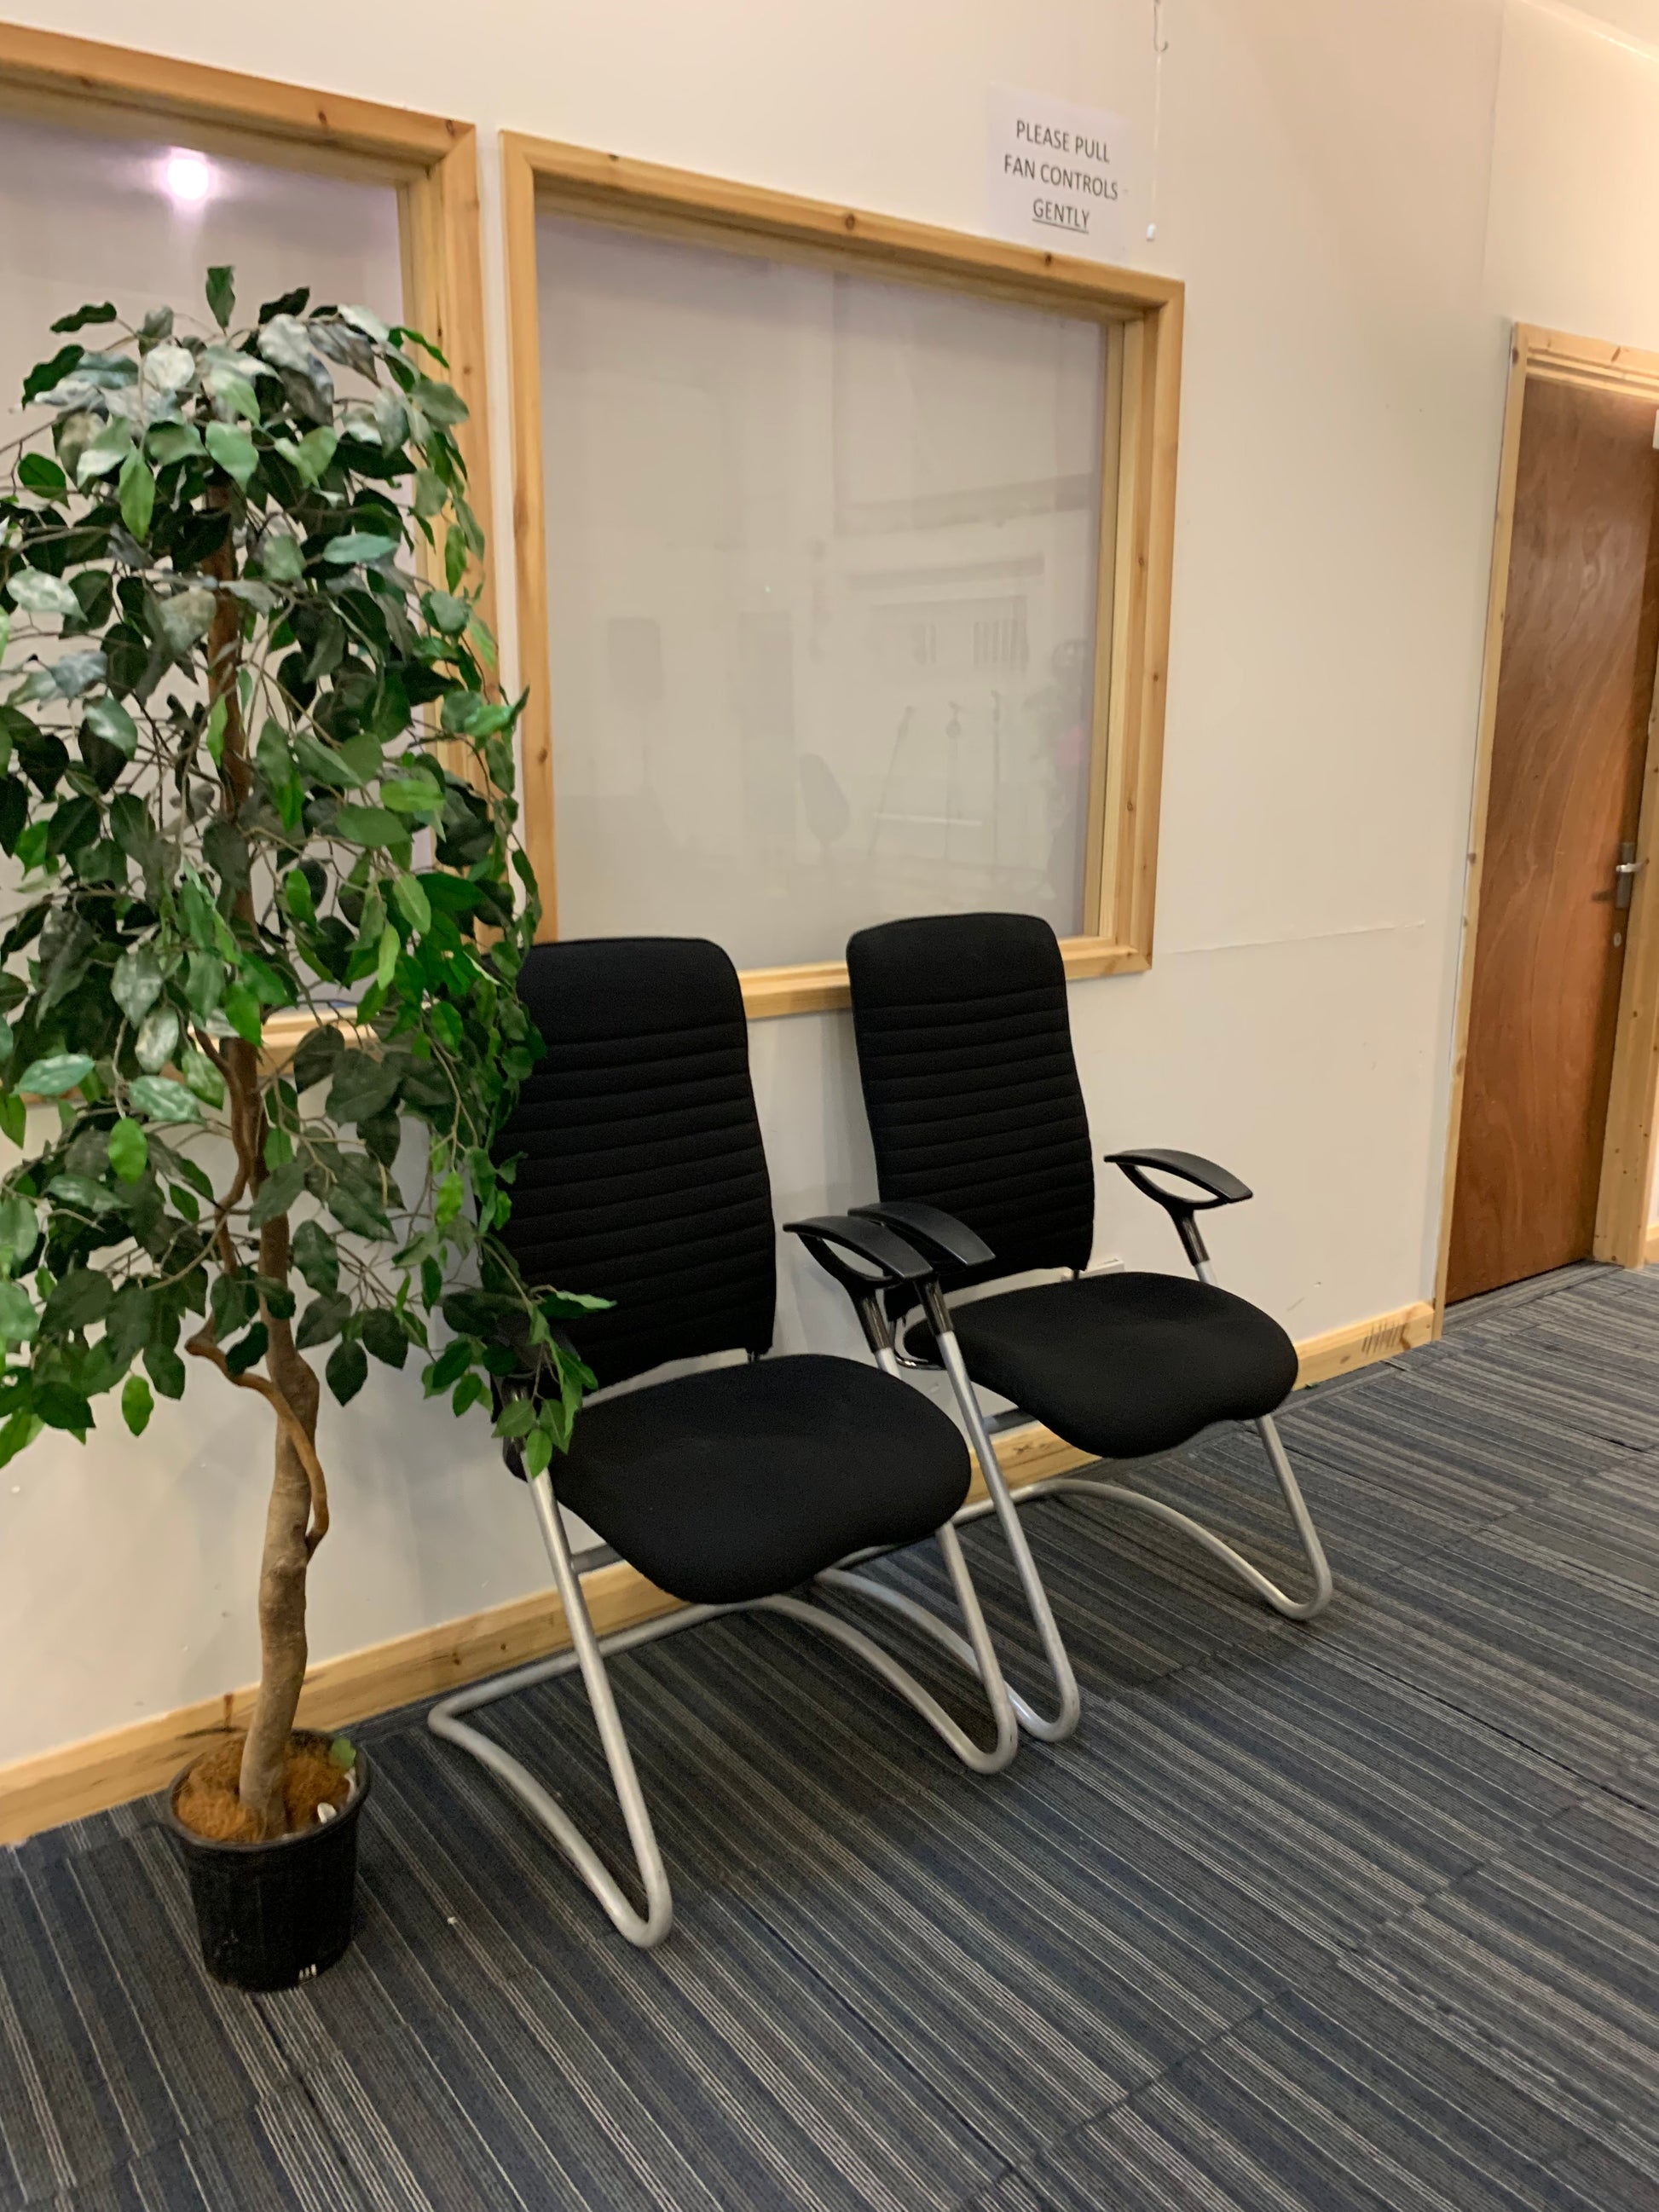 centre, two black executive sitland chairs, left, green plant, right brown door